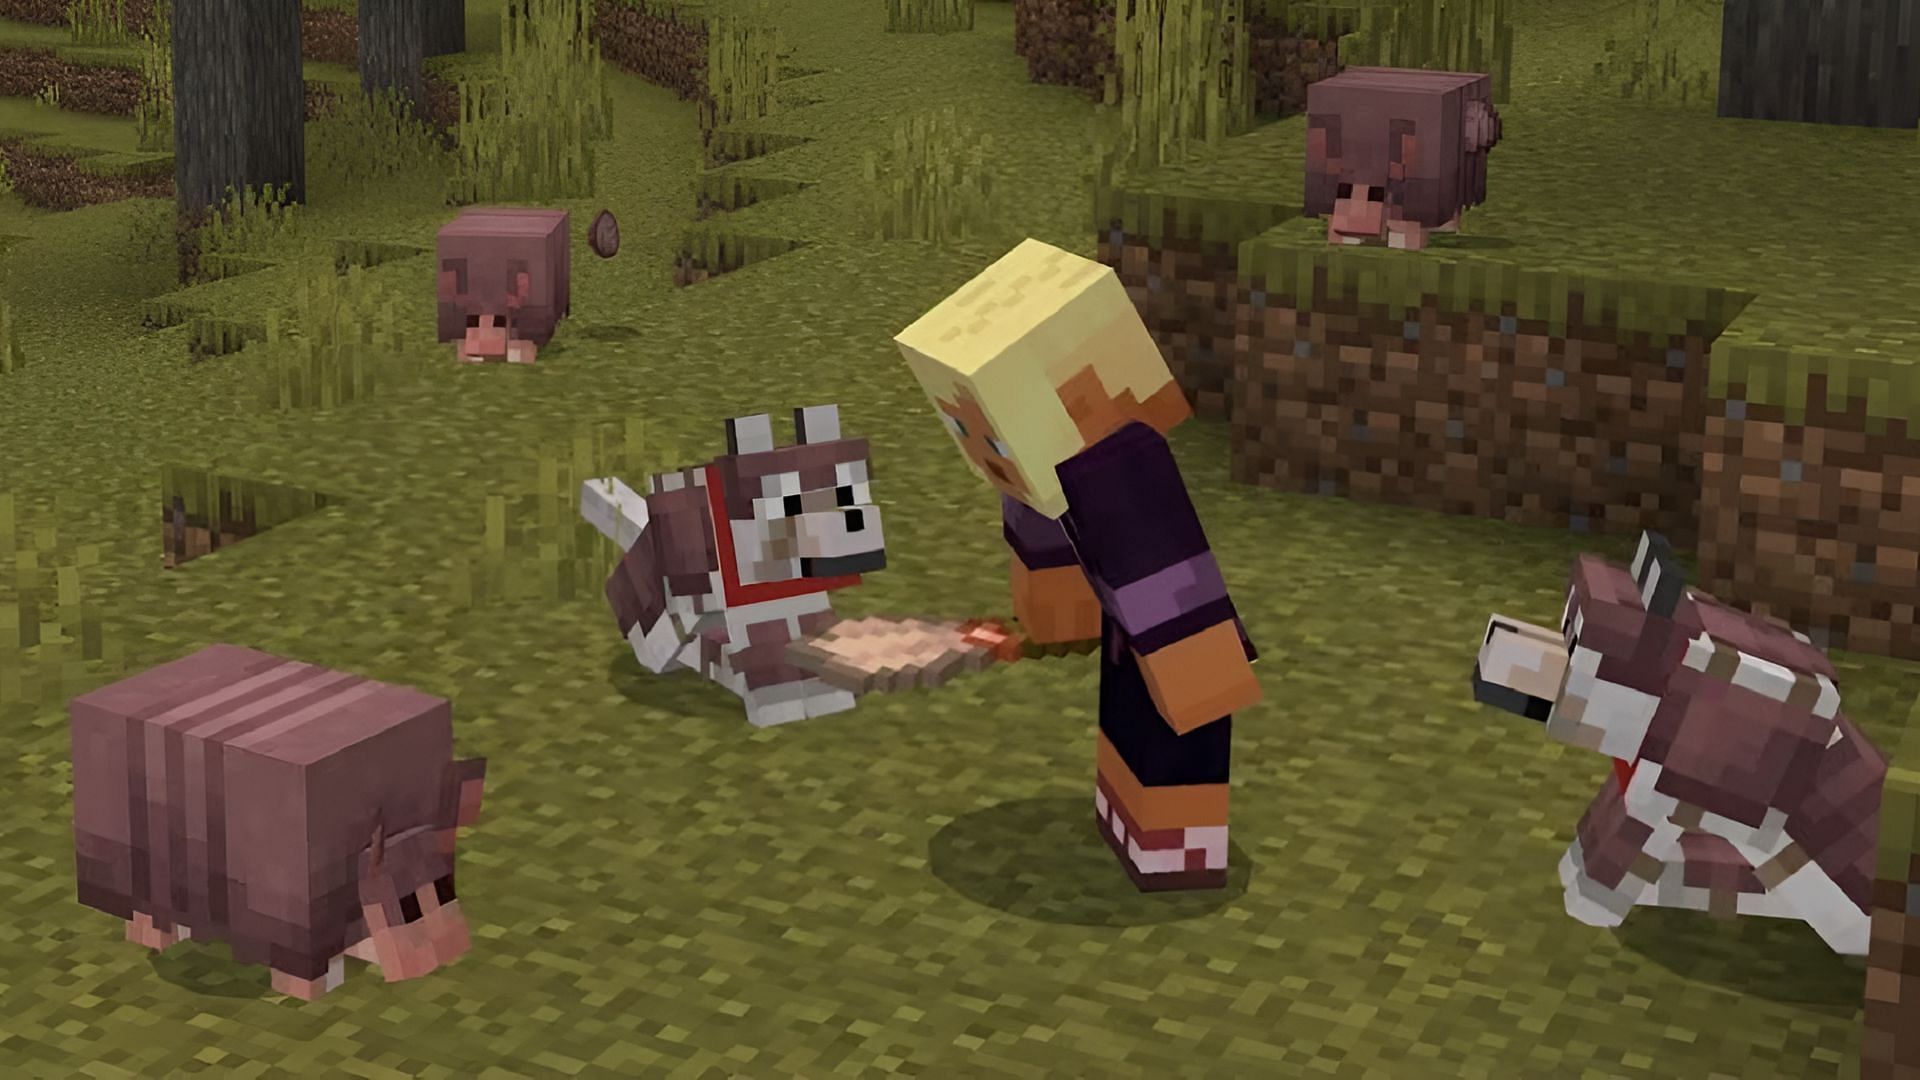 Armadillos and wolf armor should make Minecraft Previews even more entertaining than before (Image via Mojang)